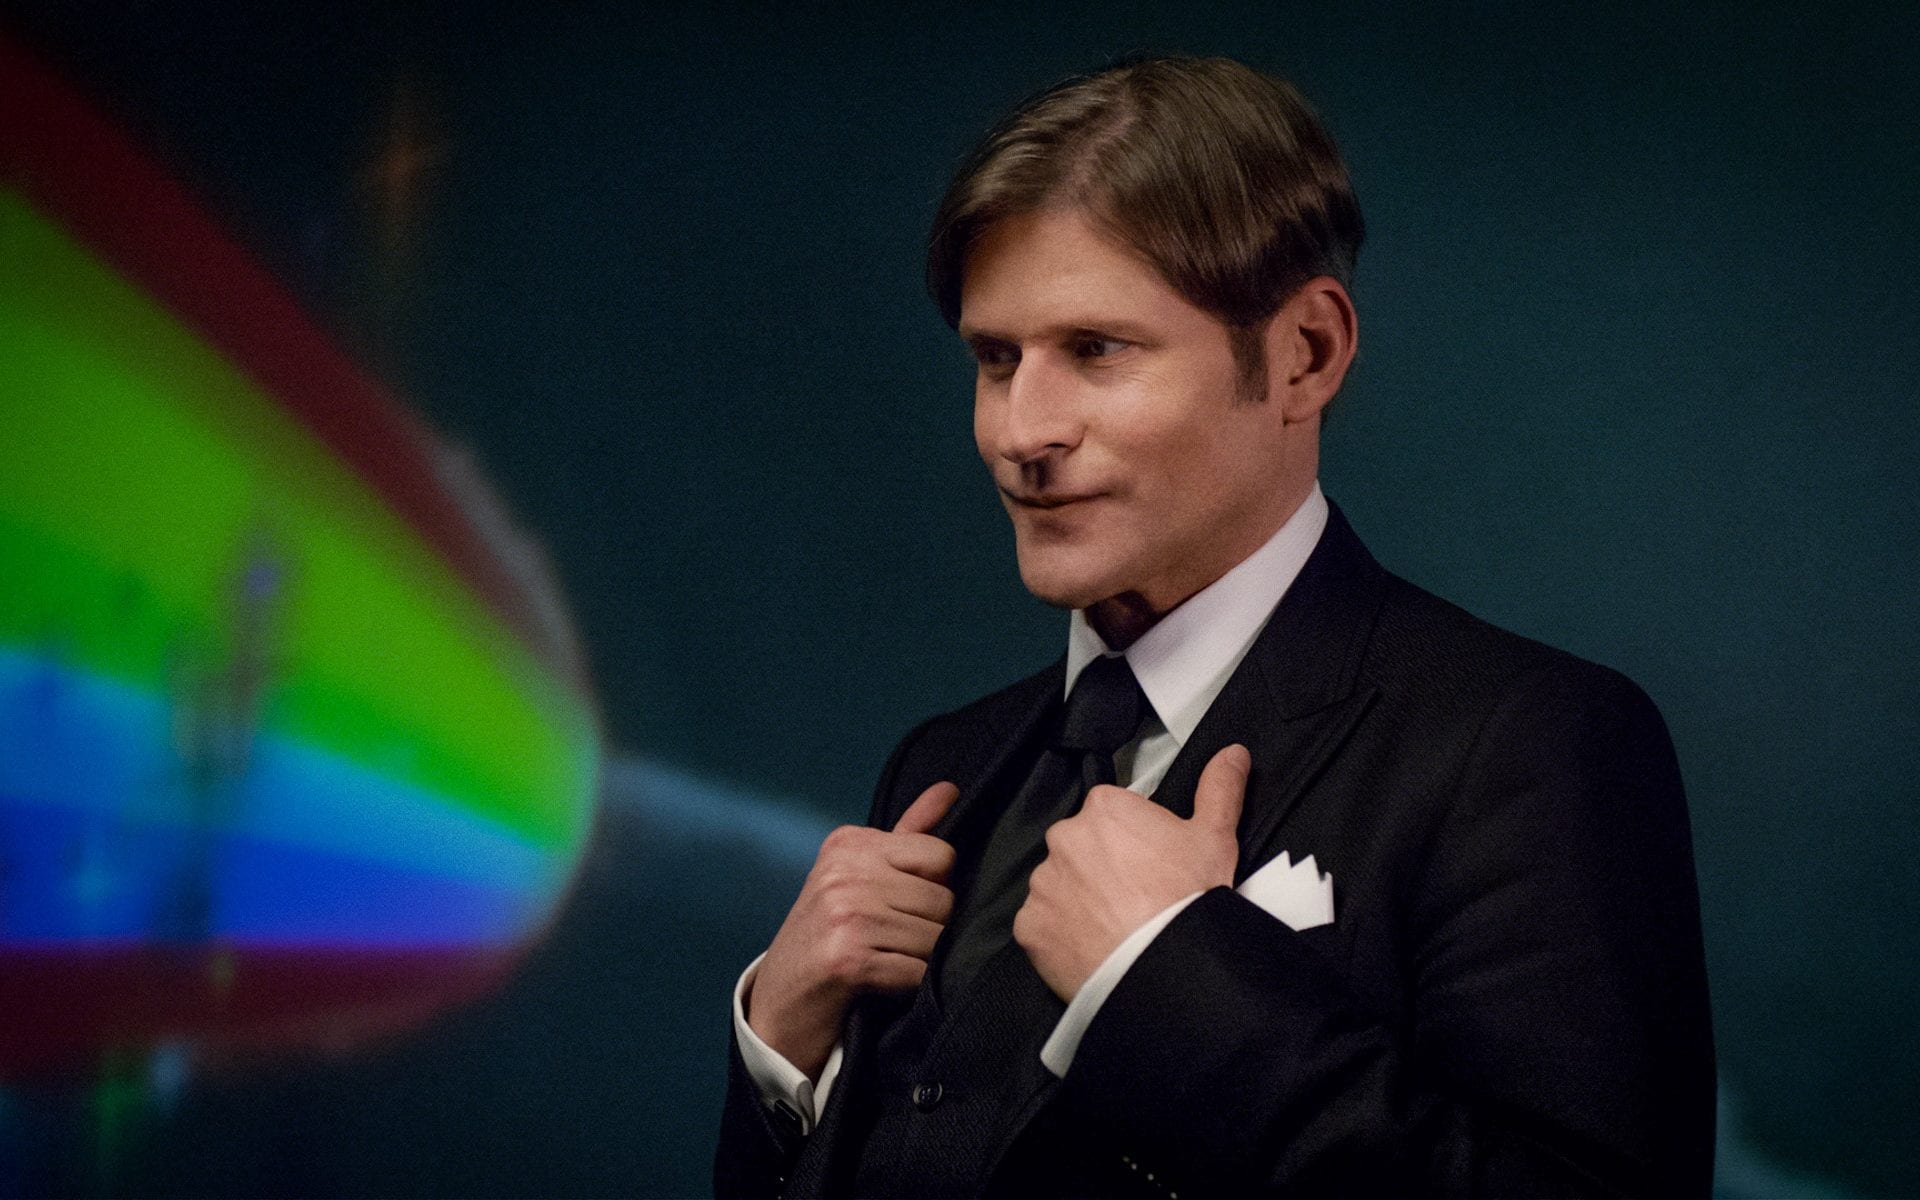 Hollywood's last true eccentric: the spectacularly odd life of American Gods star Crispin Glover